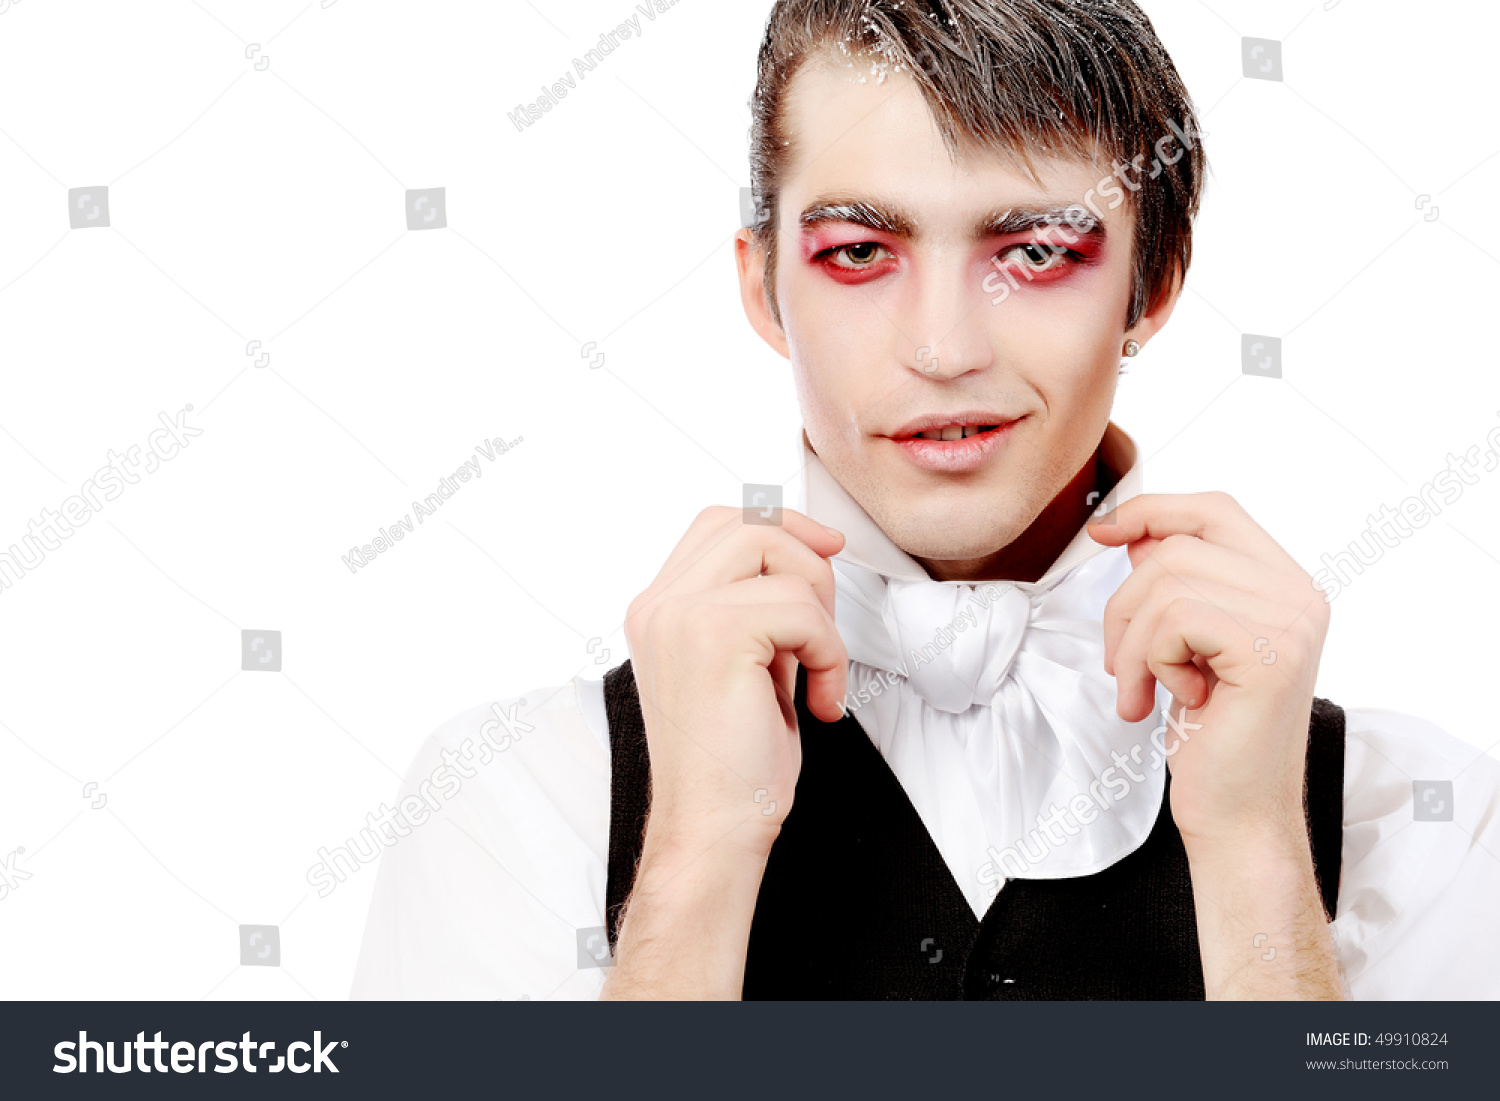 Portrait Handsome Young Man Vampire Style Stock Photo 49910824 ...